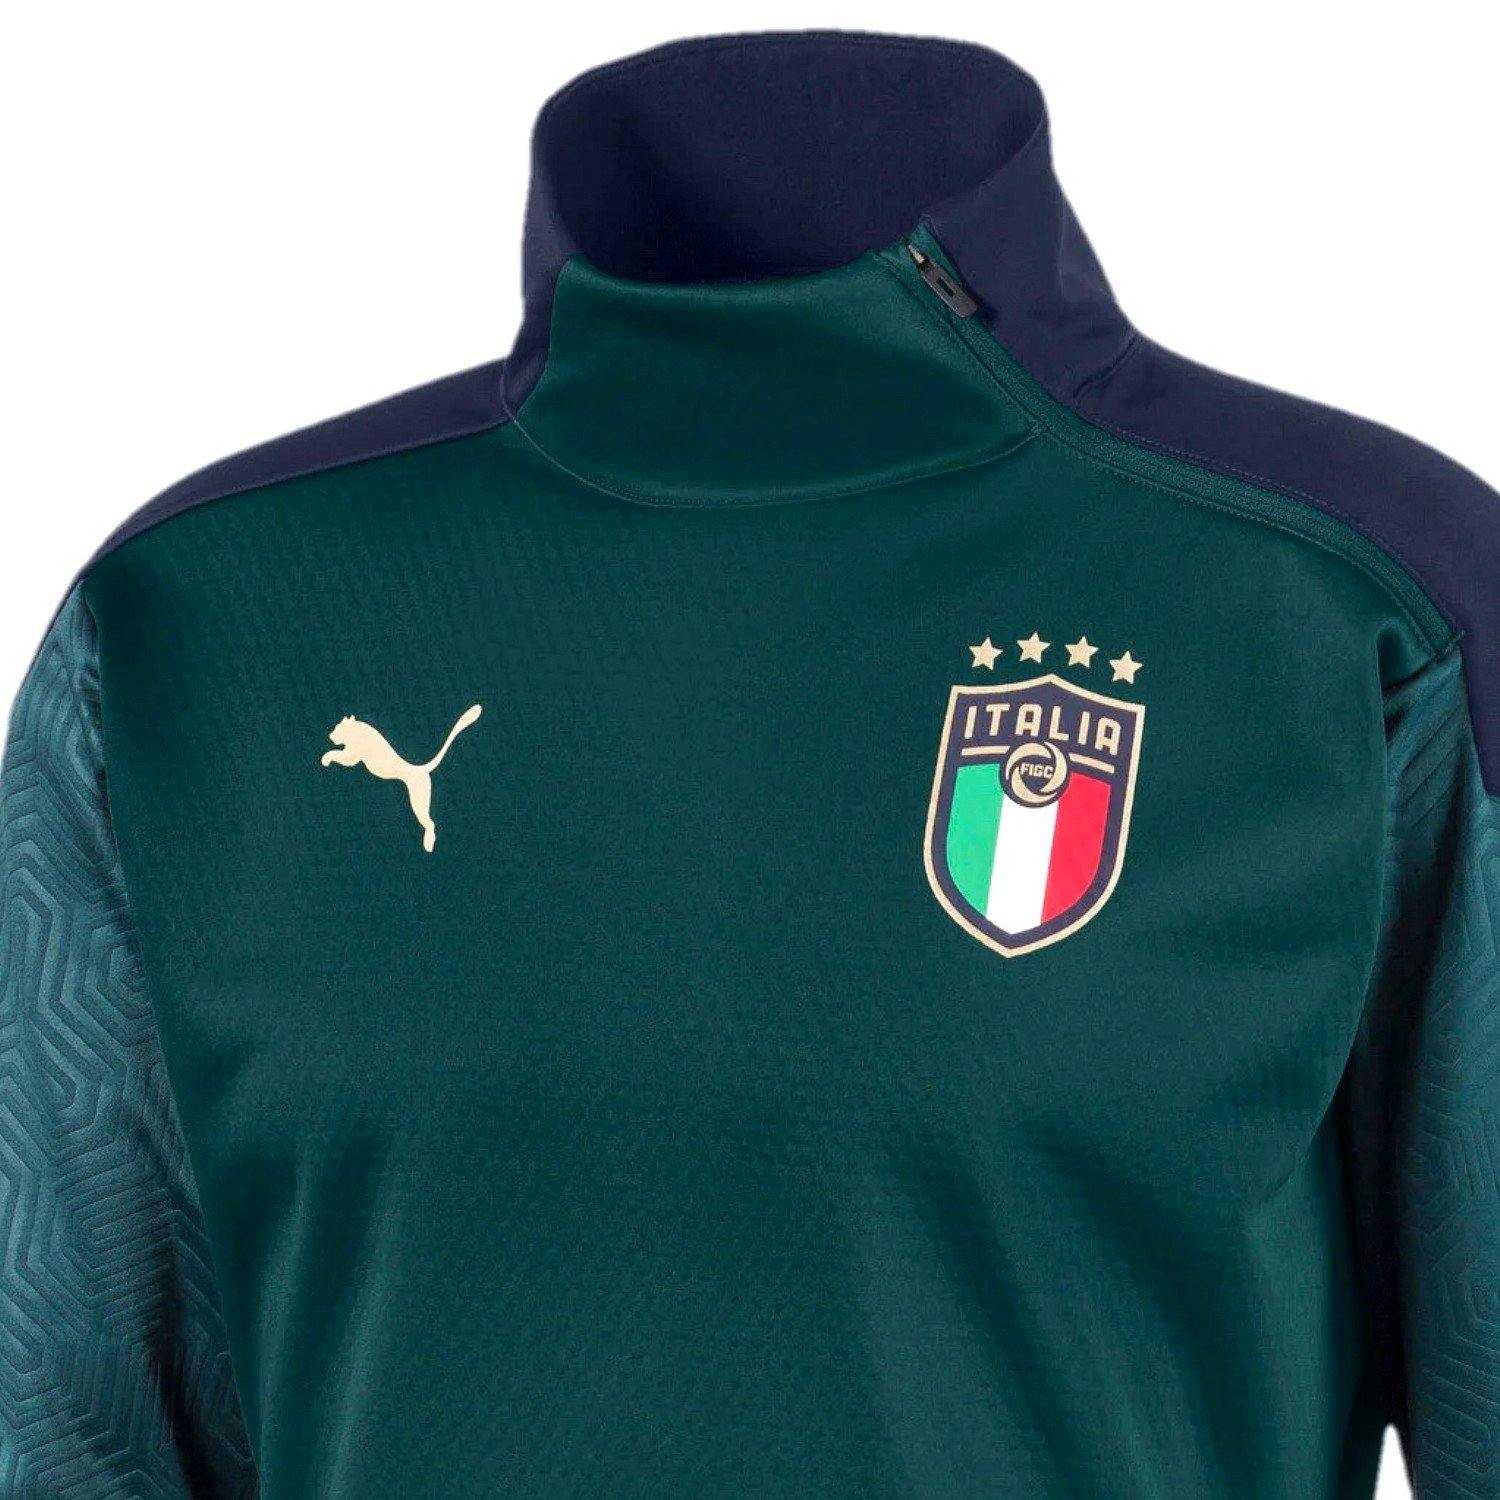 Why is the new Italian National team kit green?